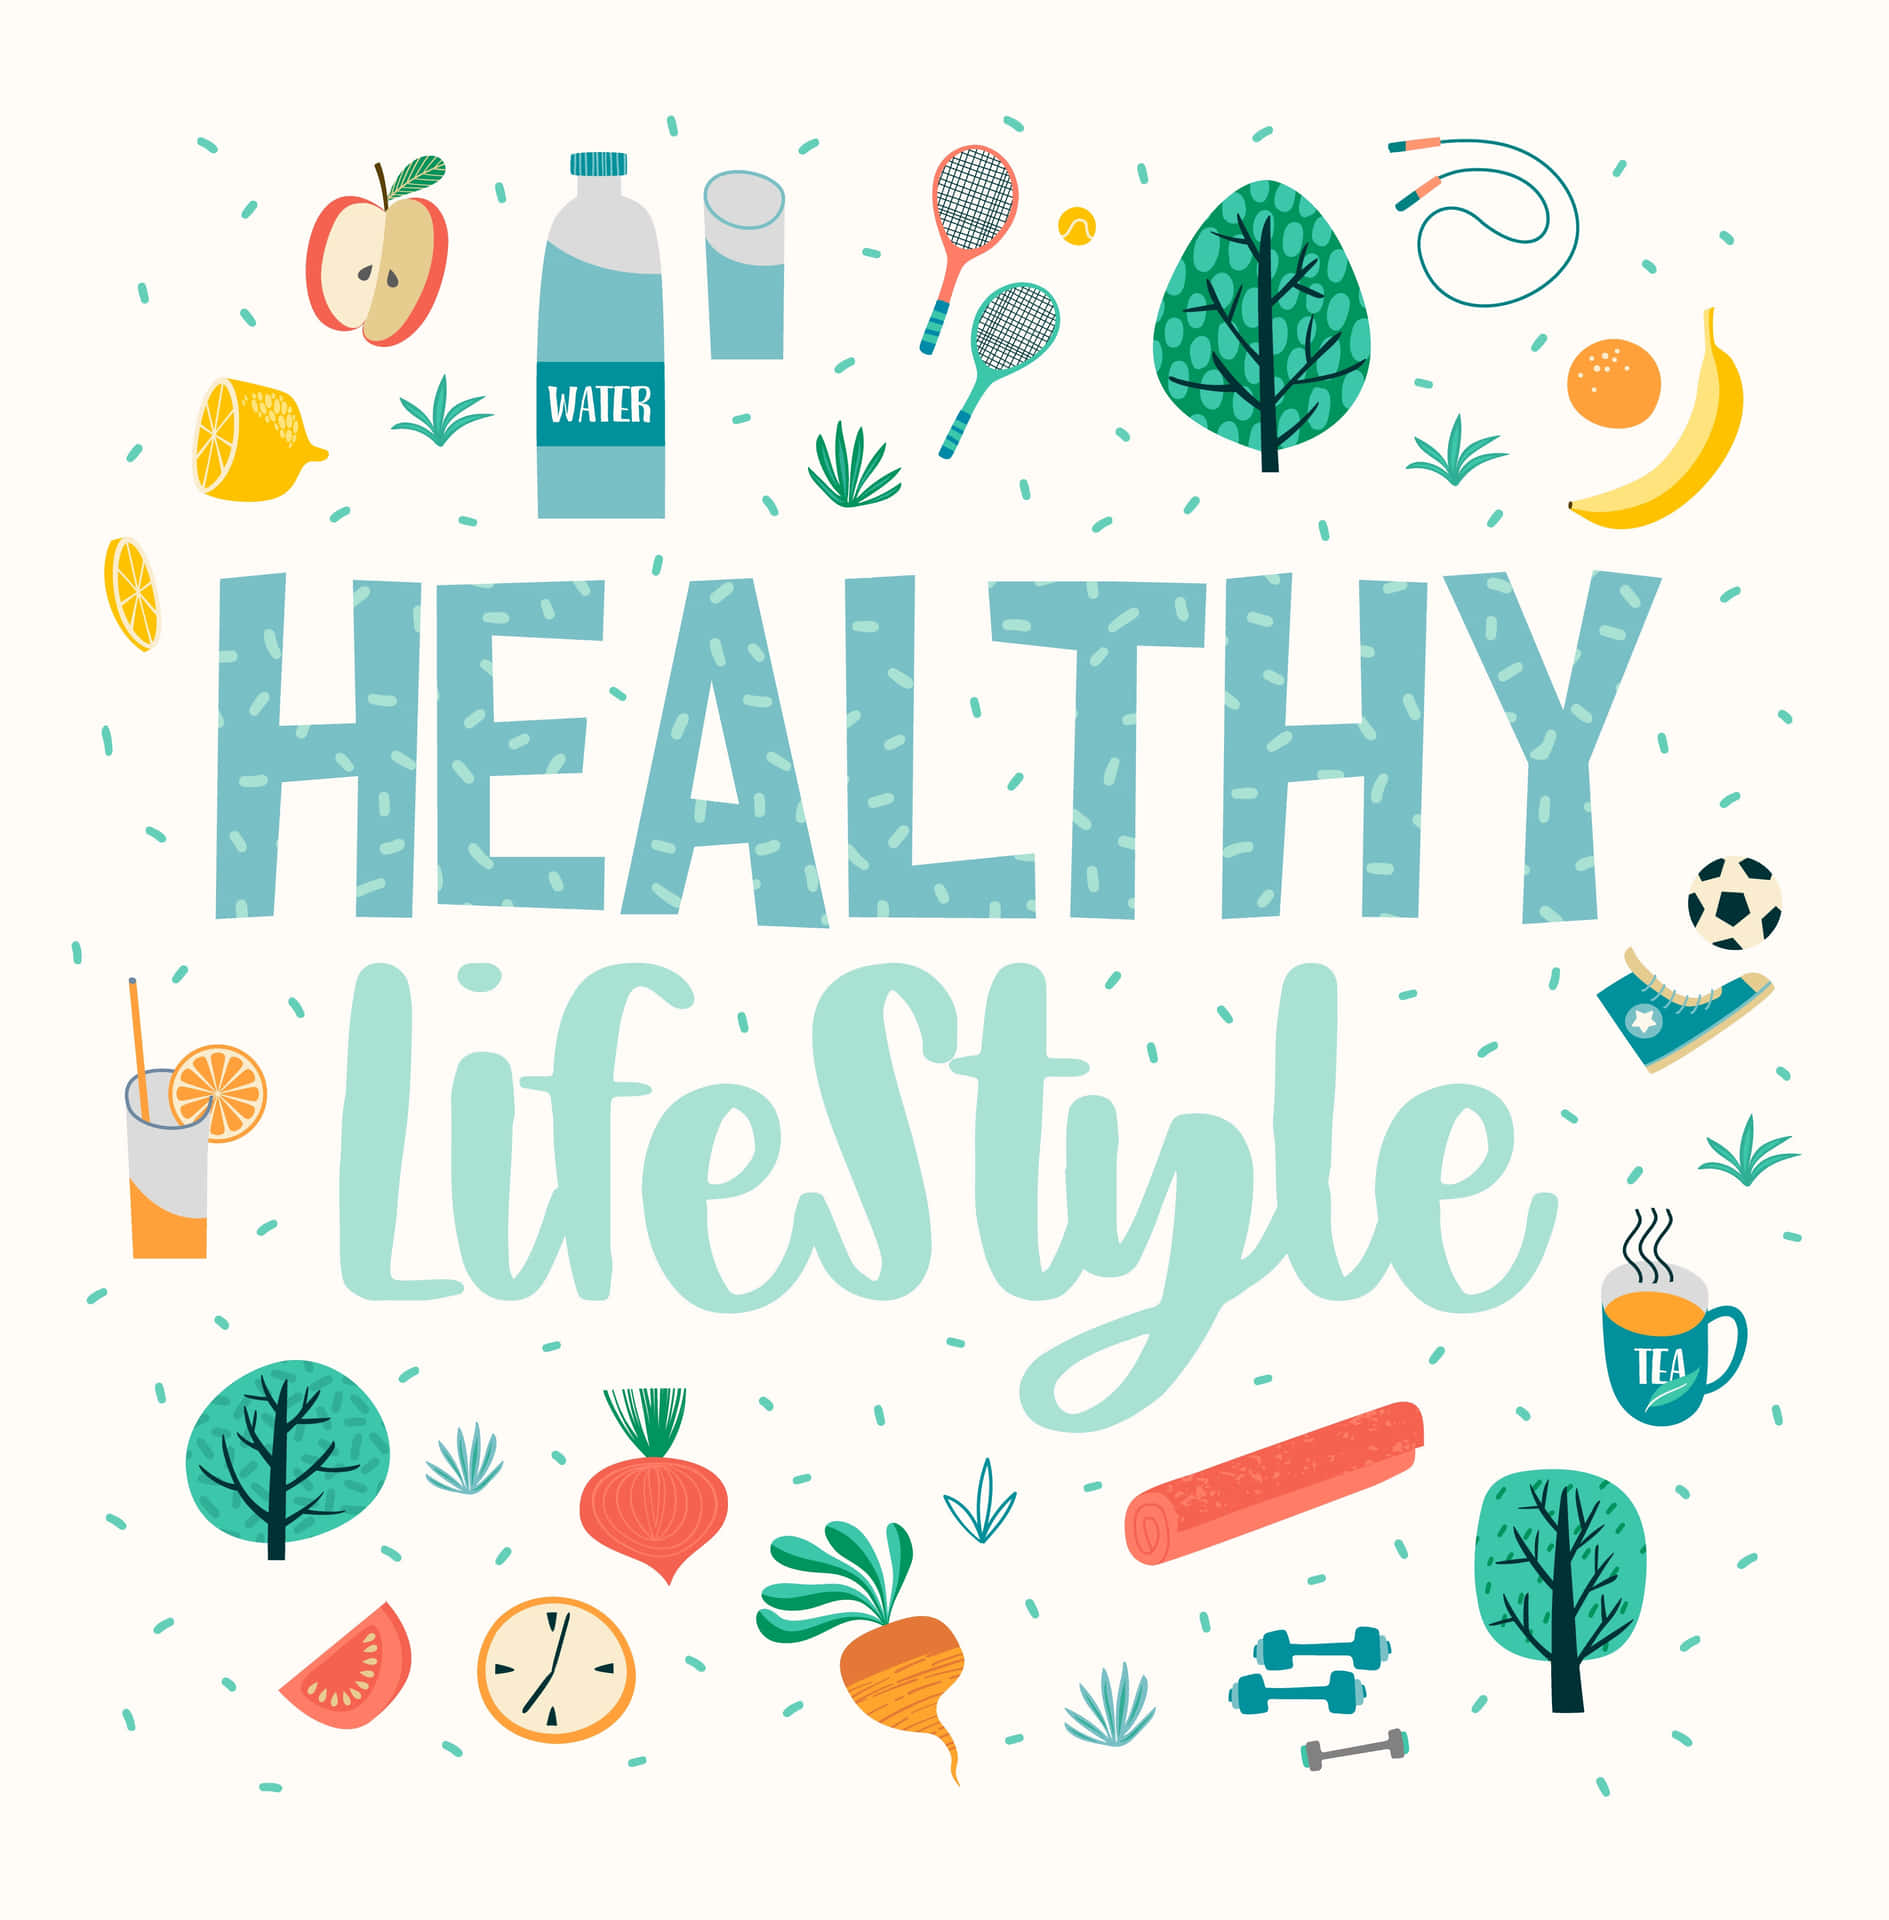 Healthy Lifestyle - A Colorful Illustration